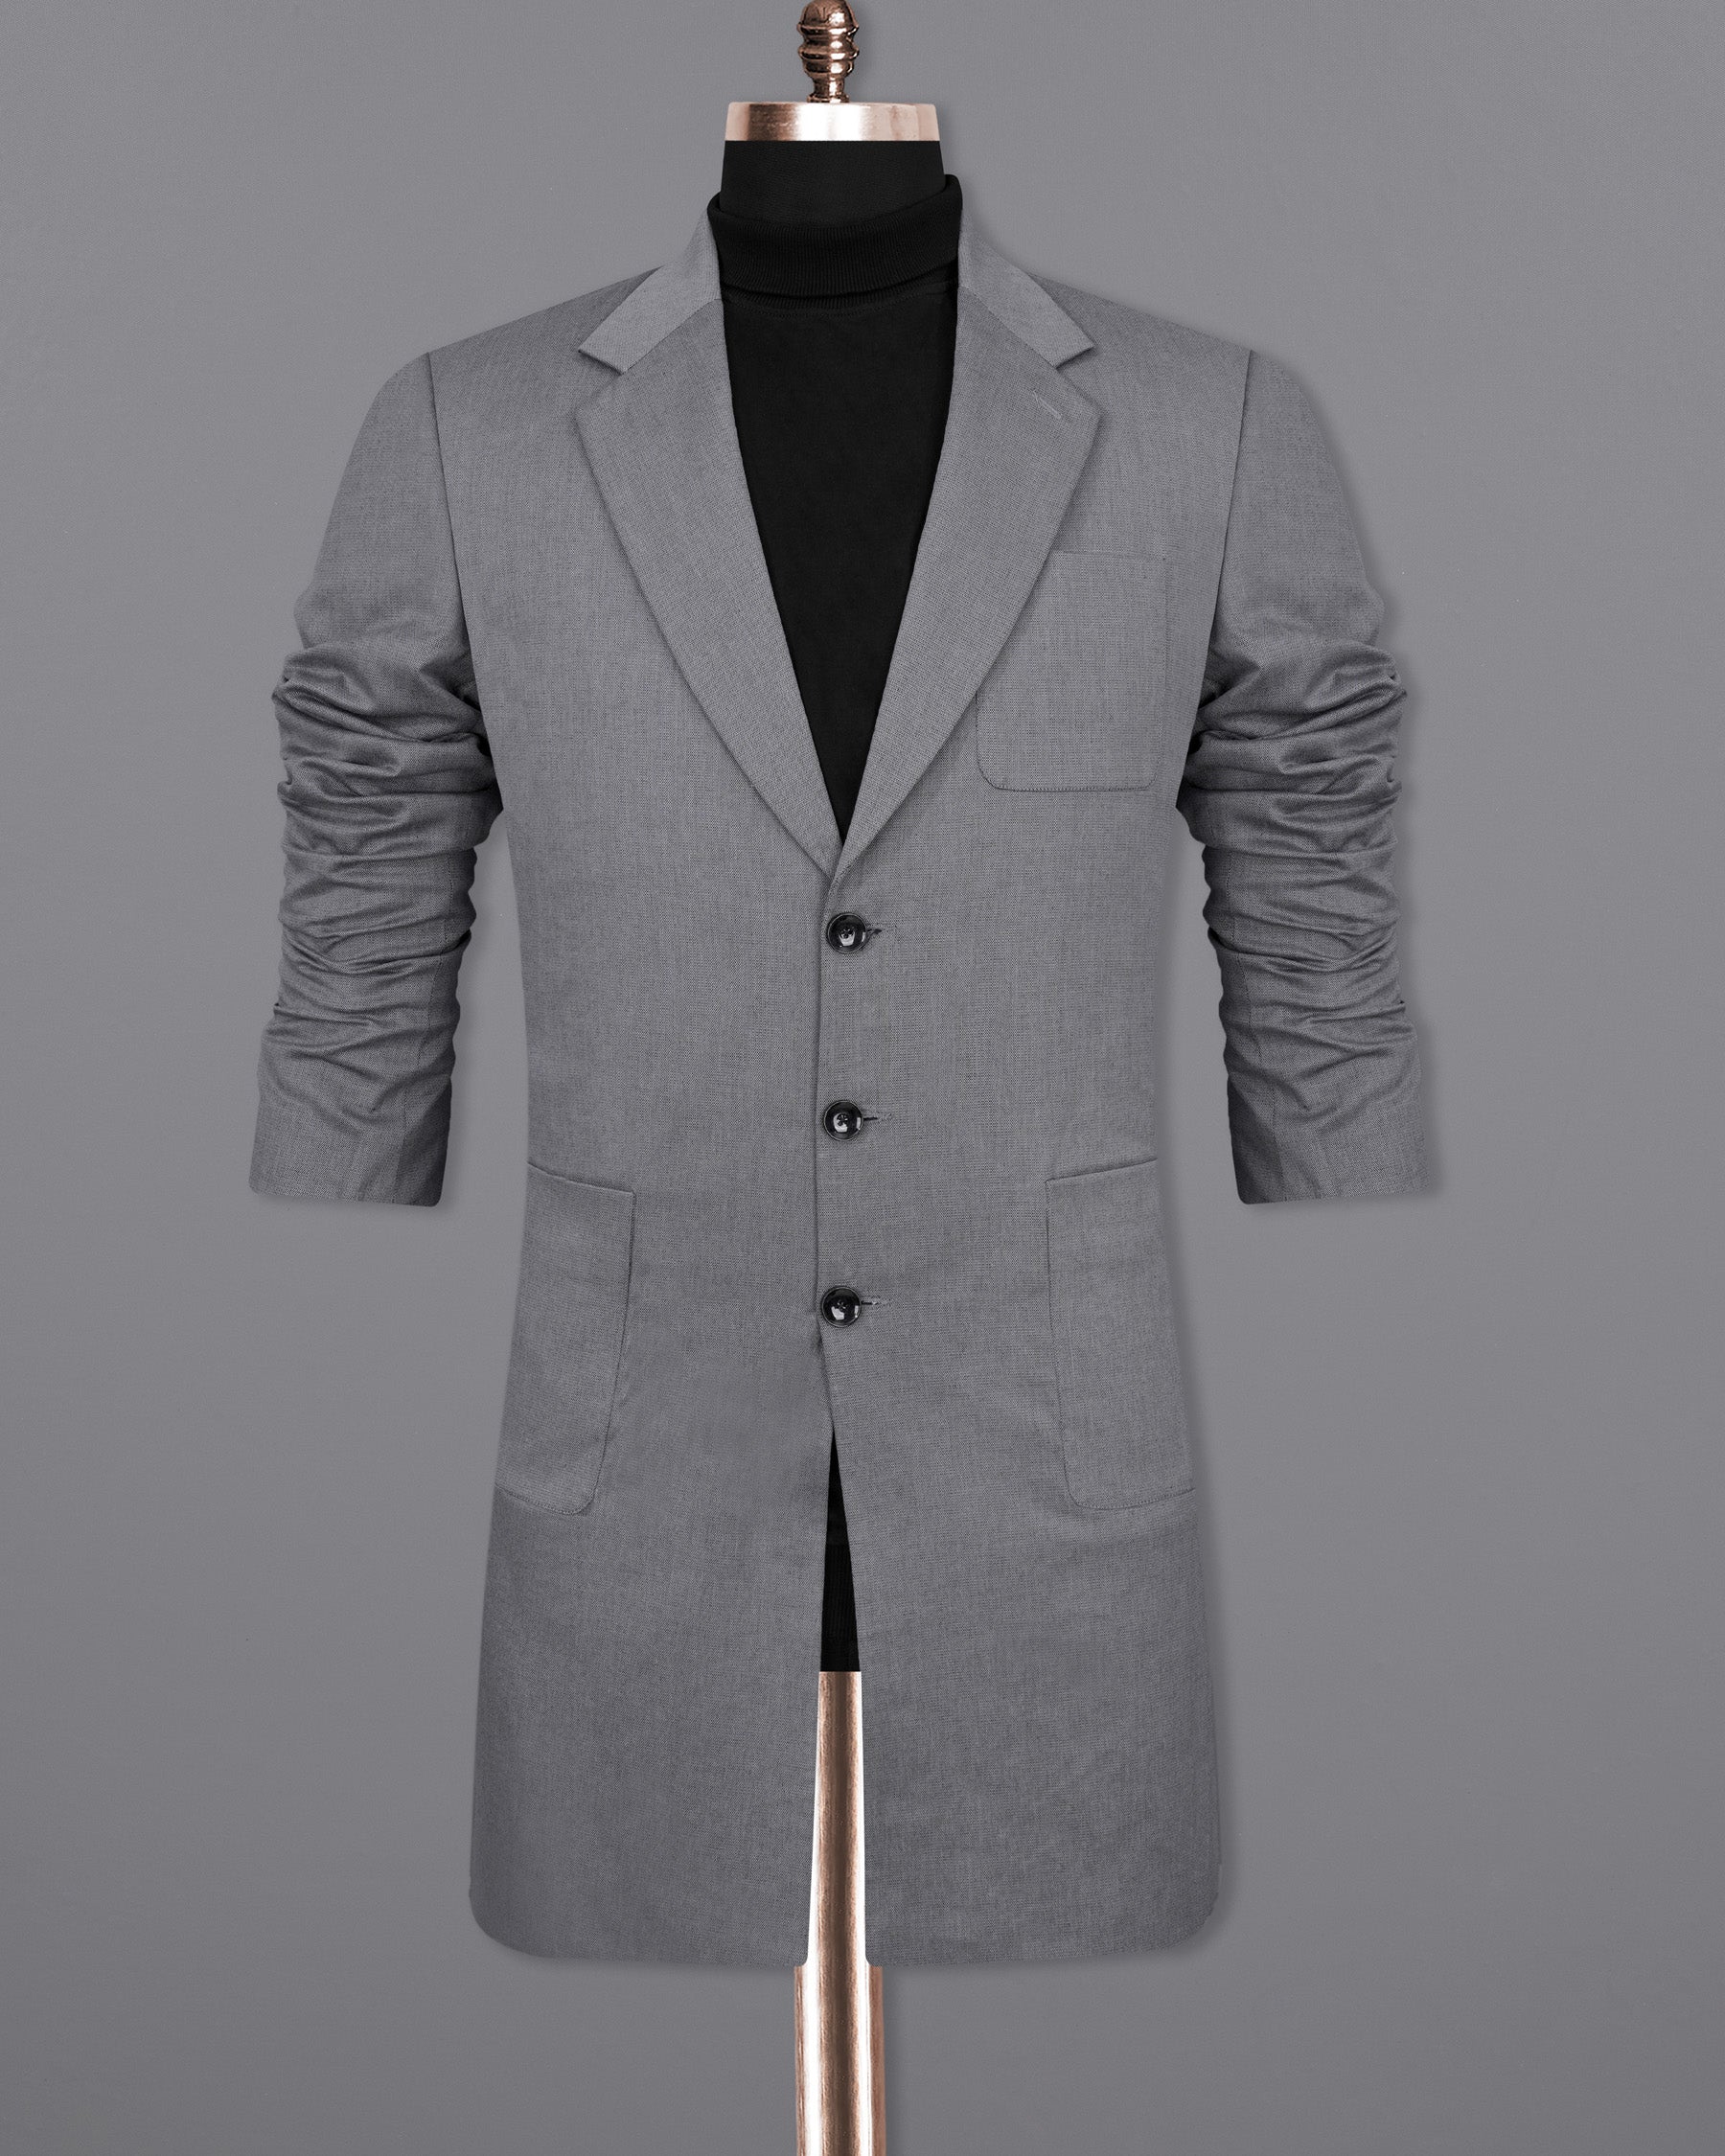 Storm Dust Gray Single Breasted Trench Coat TCB2028-SB-PP-36, TCB2028-SB-PP-38, TCB2028-SB-PP-40, TCB2028-SB-PP-42, TCB2028-SB-PP-44, TCB2028-SB-PP-46, TCB2028-SB-PP-48, TCB2028-SB-PP-50, TCB2028-SB-PP-52, TCB2028-SB-PP-54, TCB2028-SB-PP-56, TCB2028-SB-PP-58, TCB2028-SB-PP-60